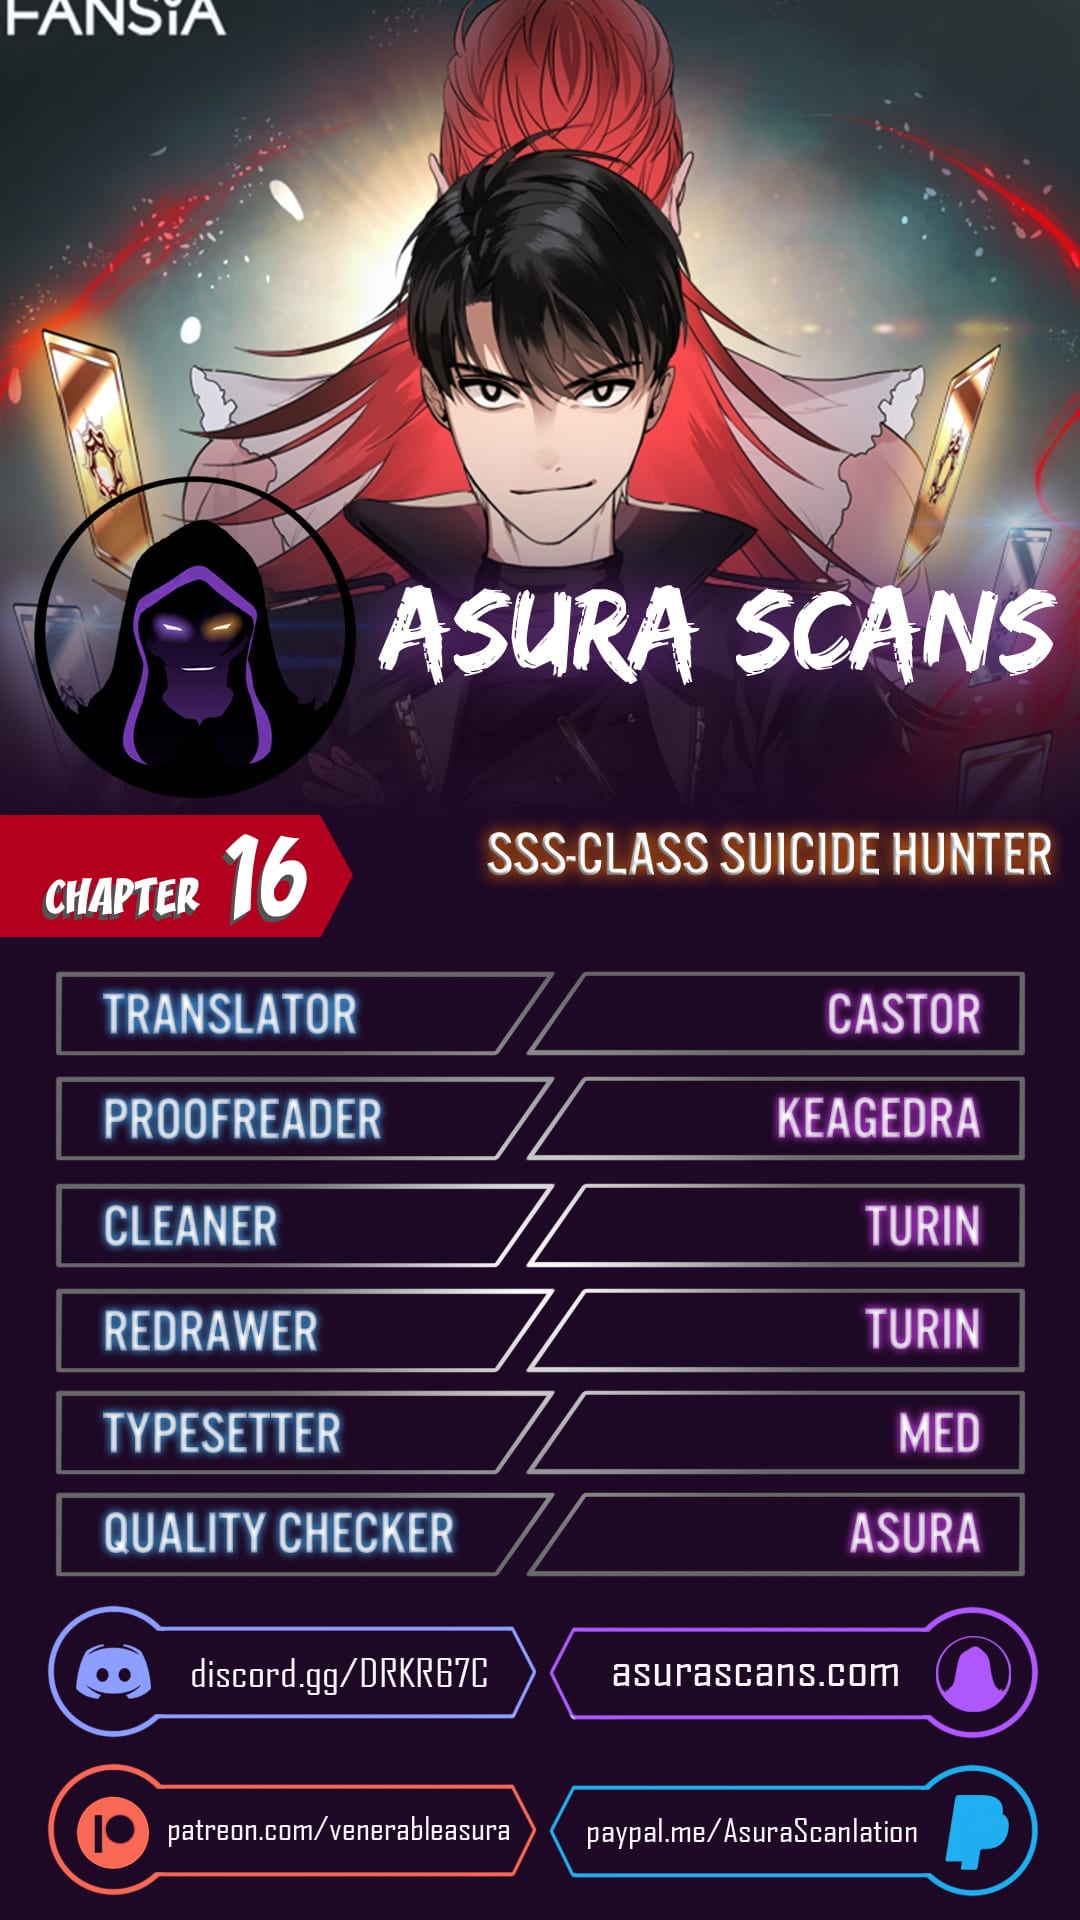 SSS-Class Suicide Hunter chapter 16